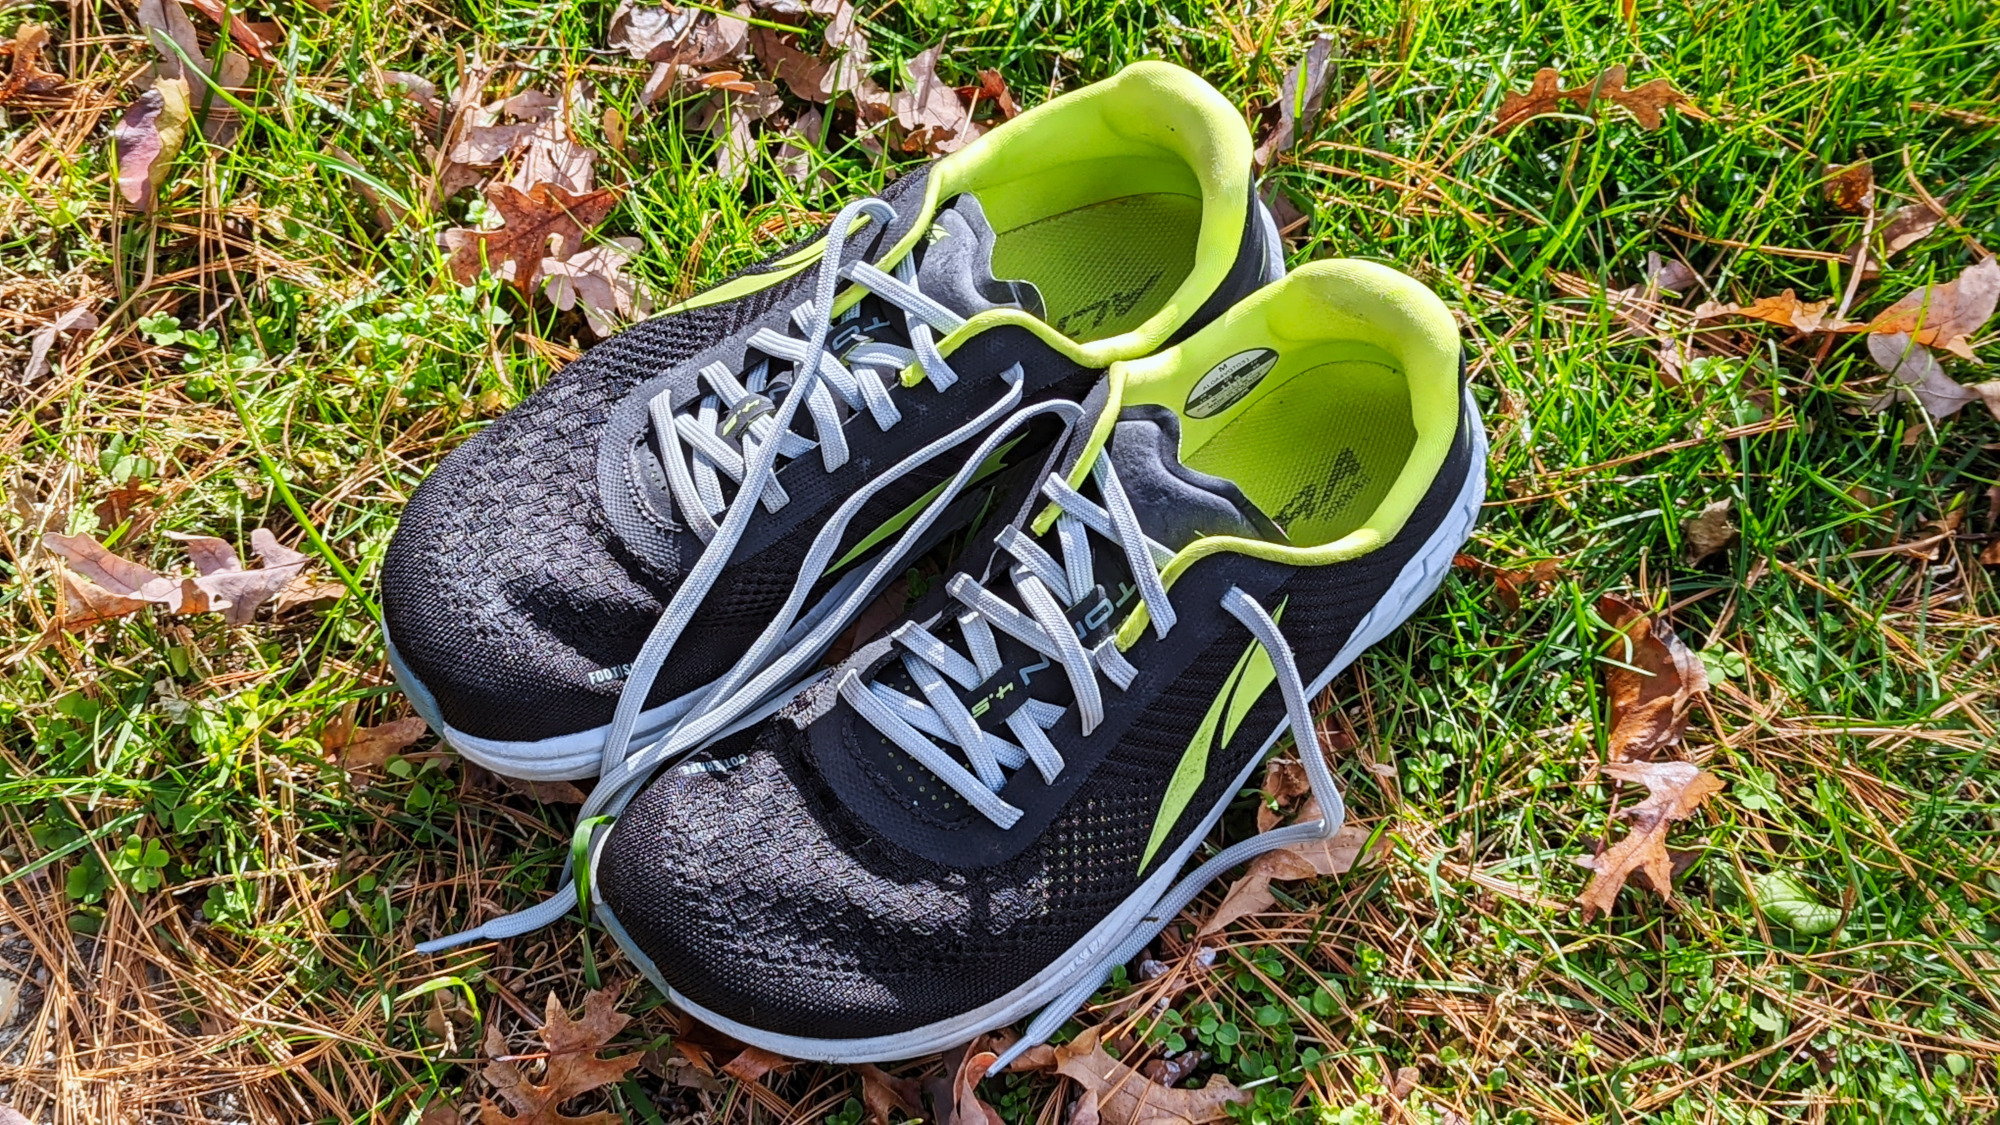 These running shoes are so good they turned me into a runner | Tom's Guide